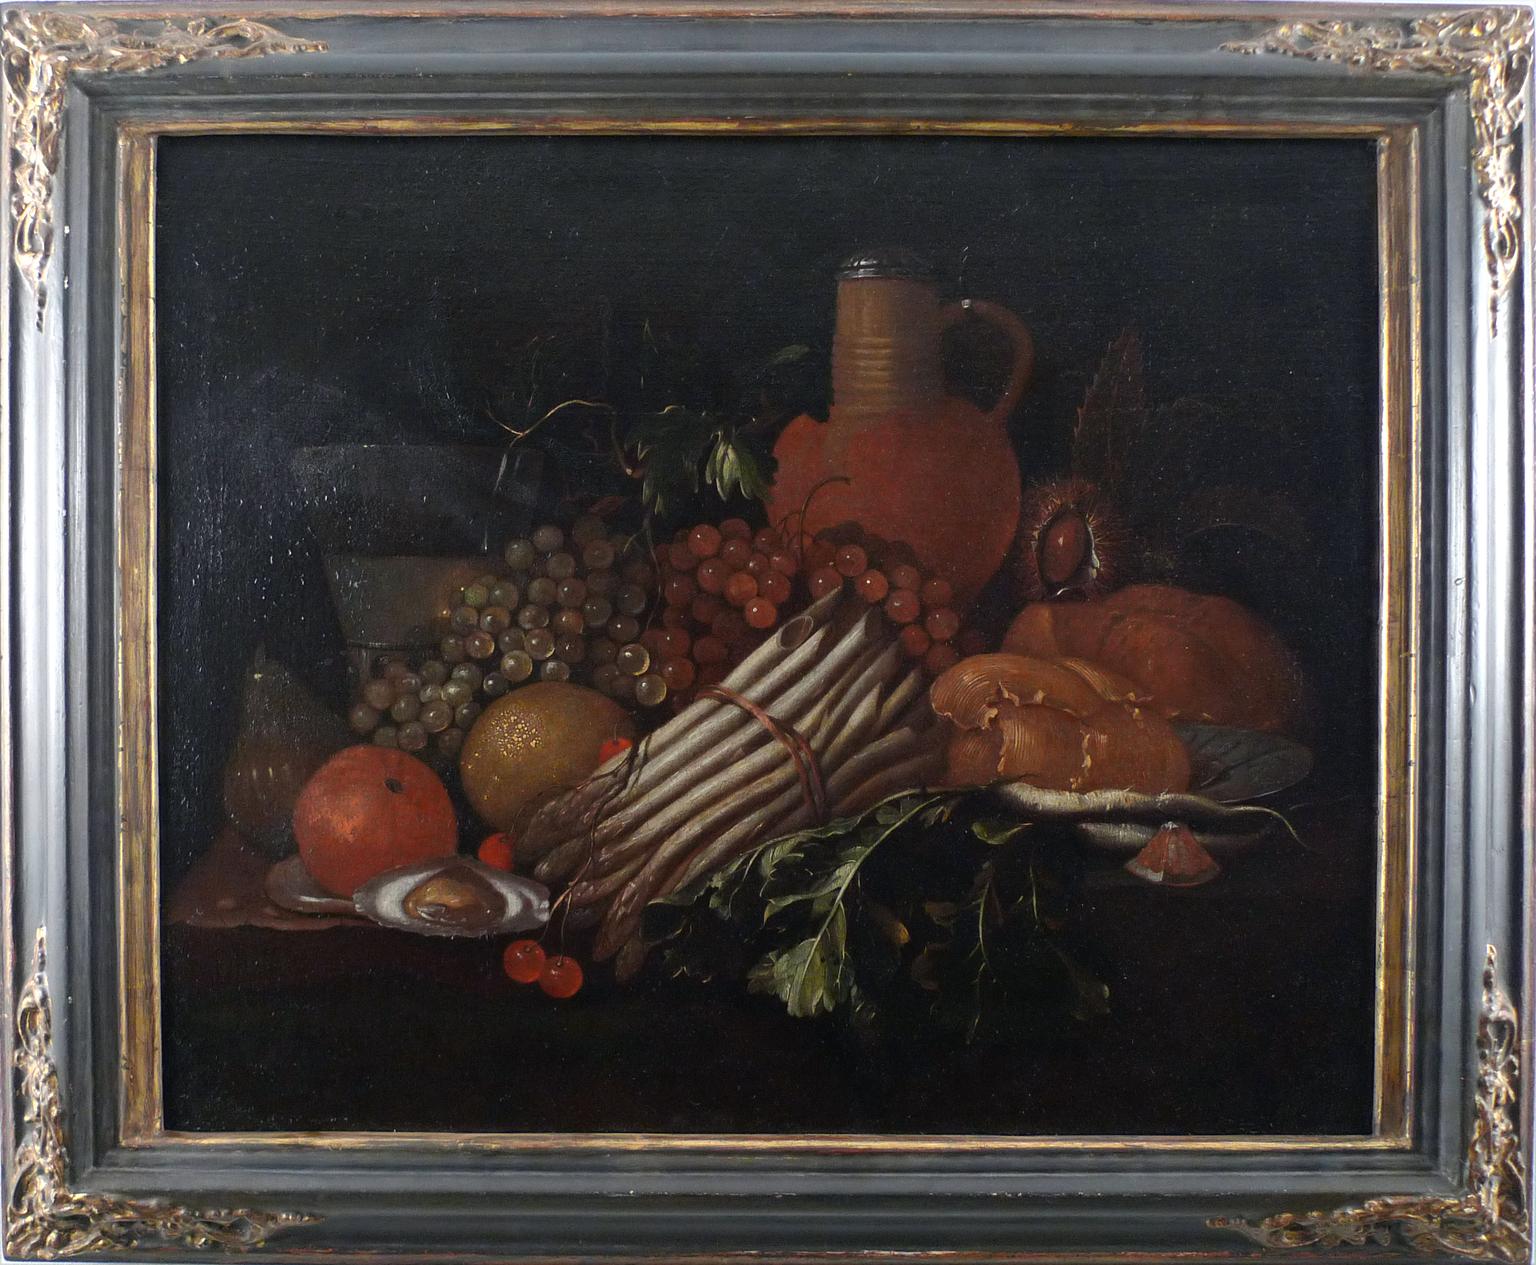 Unknown Still-Life Painting - "Still Life with Fruits", 17th Century Oil on Canvas by Flemish School